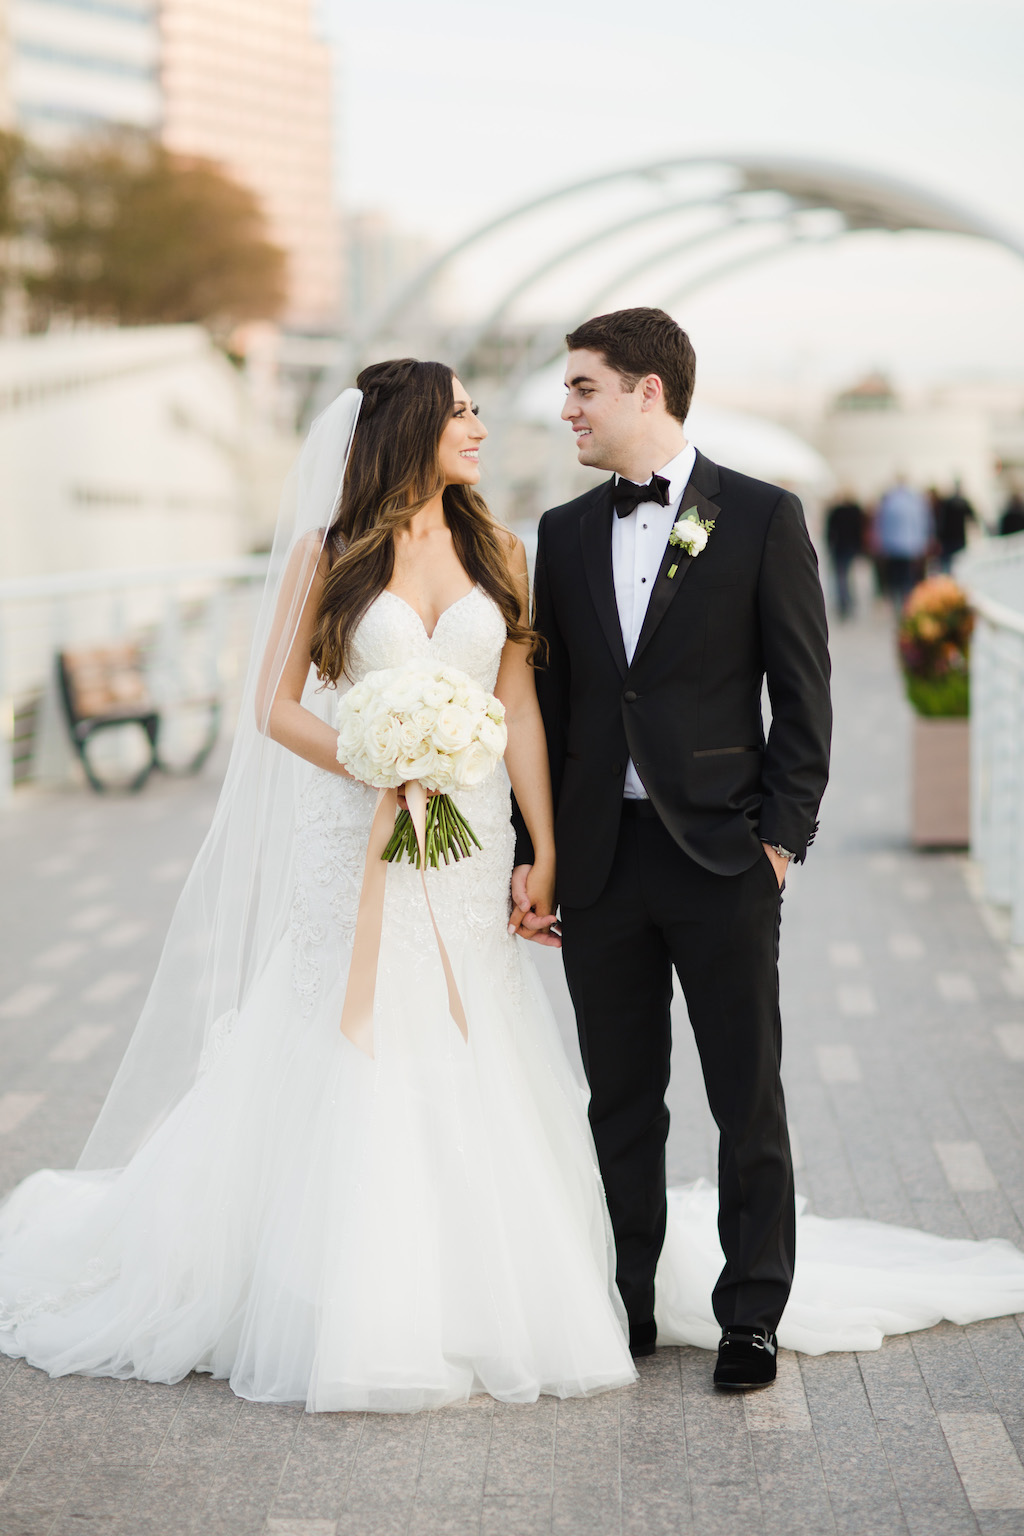 Downtown Tampa Riverwalk Outdoor Wedding Portrait, Bride in Princess Neckline Lace Trumpet Martina Liana Dress with Cathedral Veil, with White Rose Floral Bouquet with Champagne Ribbon, Groom in Black Tuxedo with Boutonniere